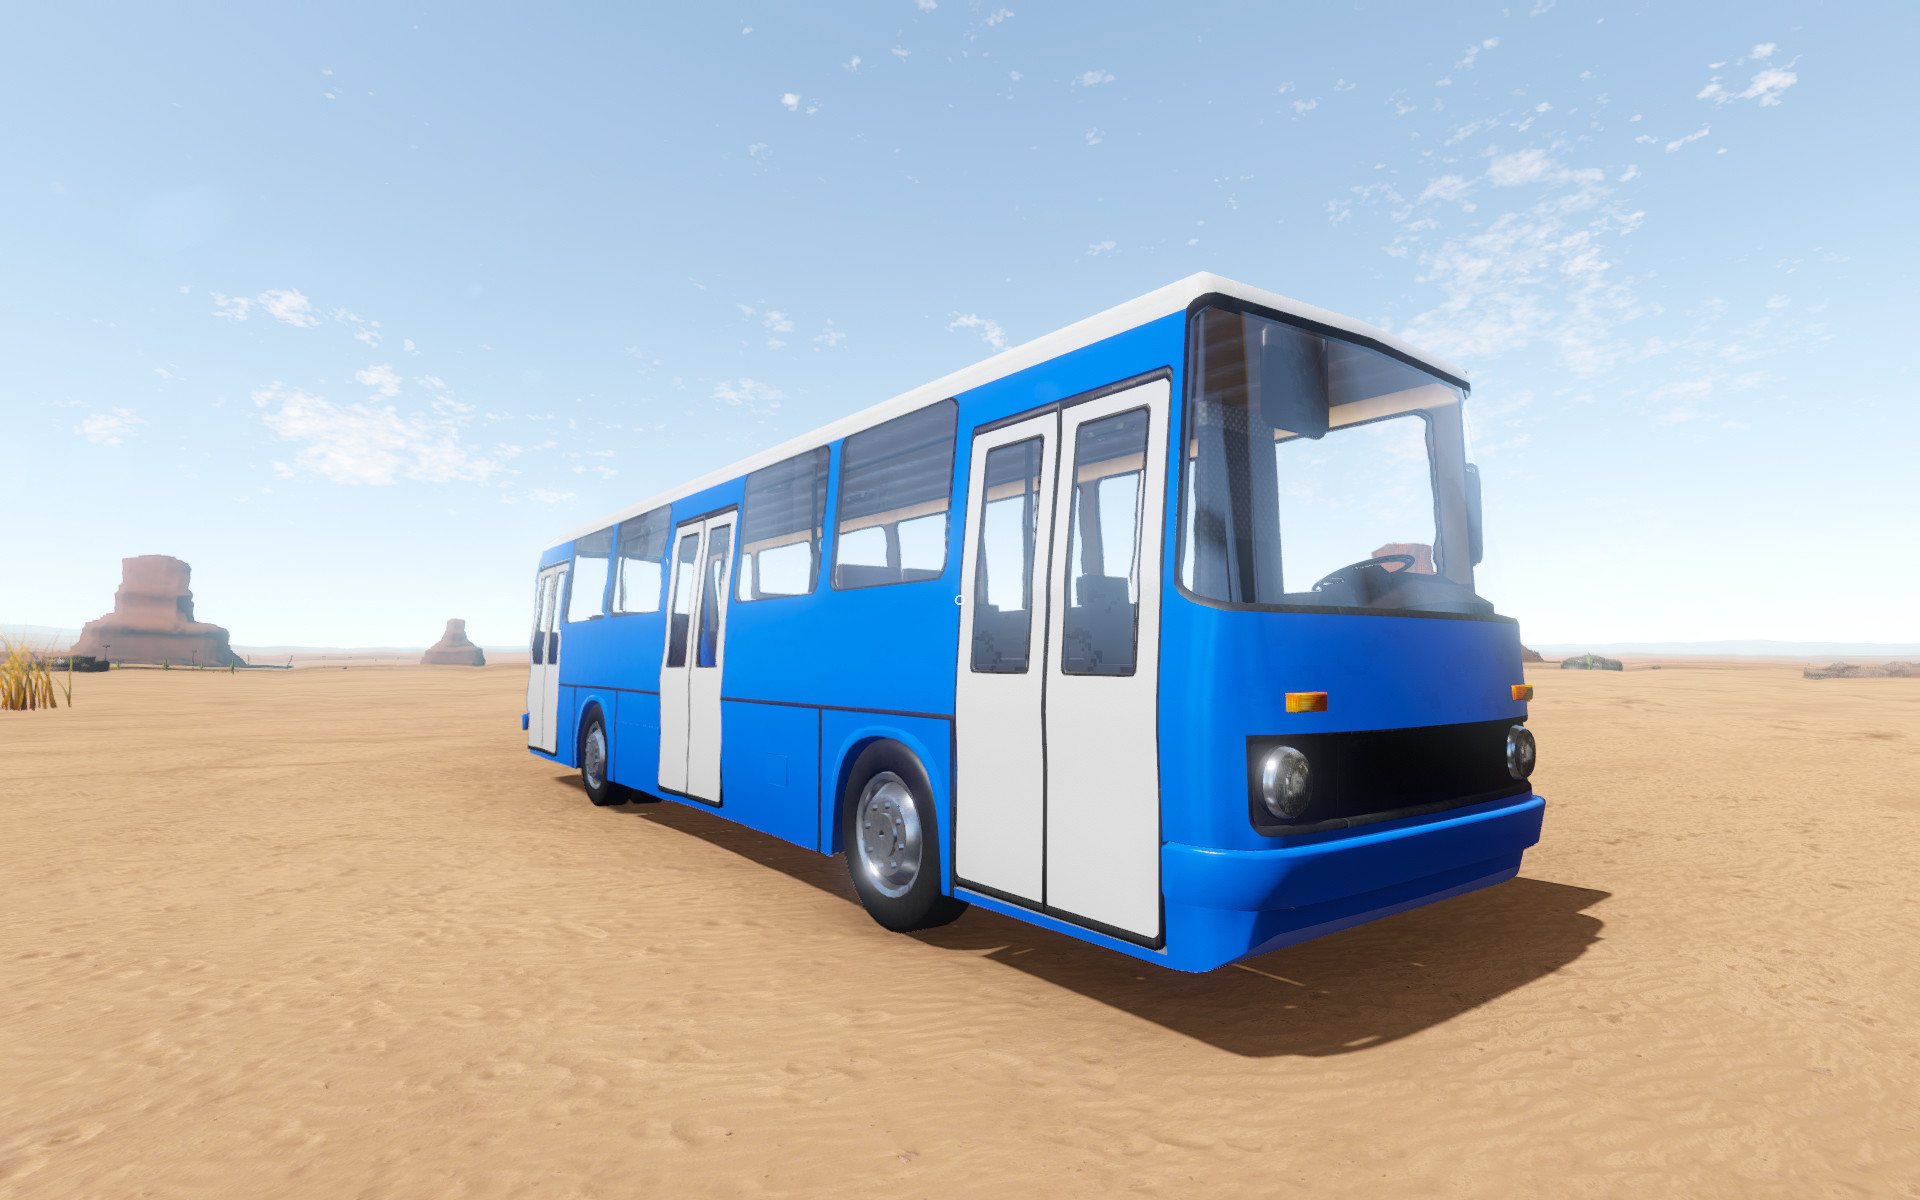 The Long Drive - All Types of Vehicle Wiki Guide - Ikarus 260/280 (Bus) - ECEF8FF